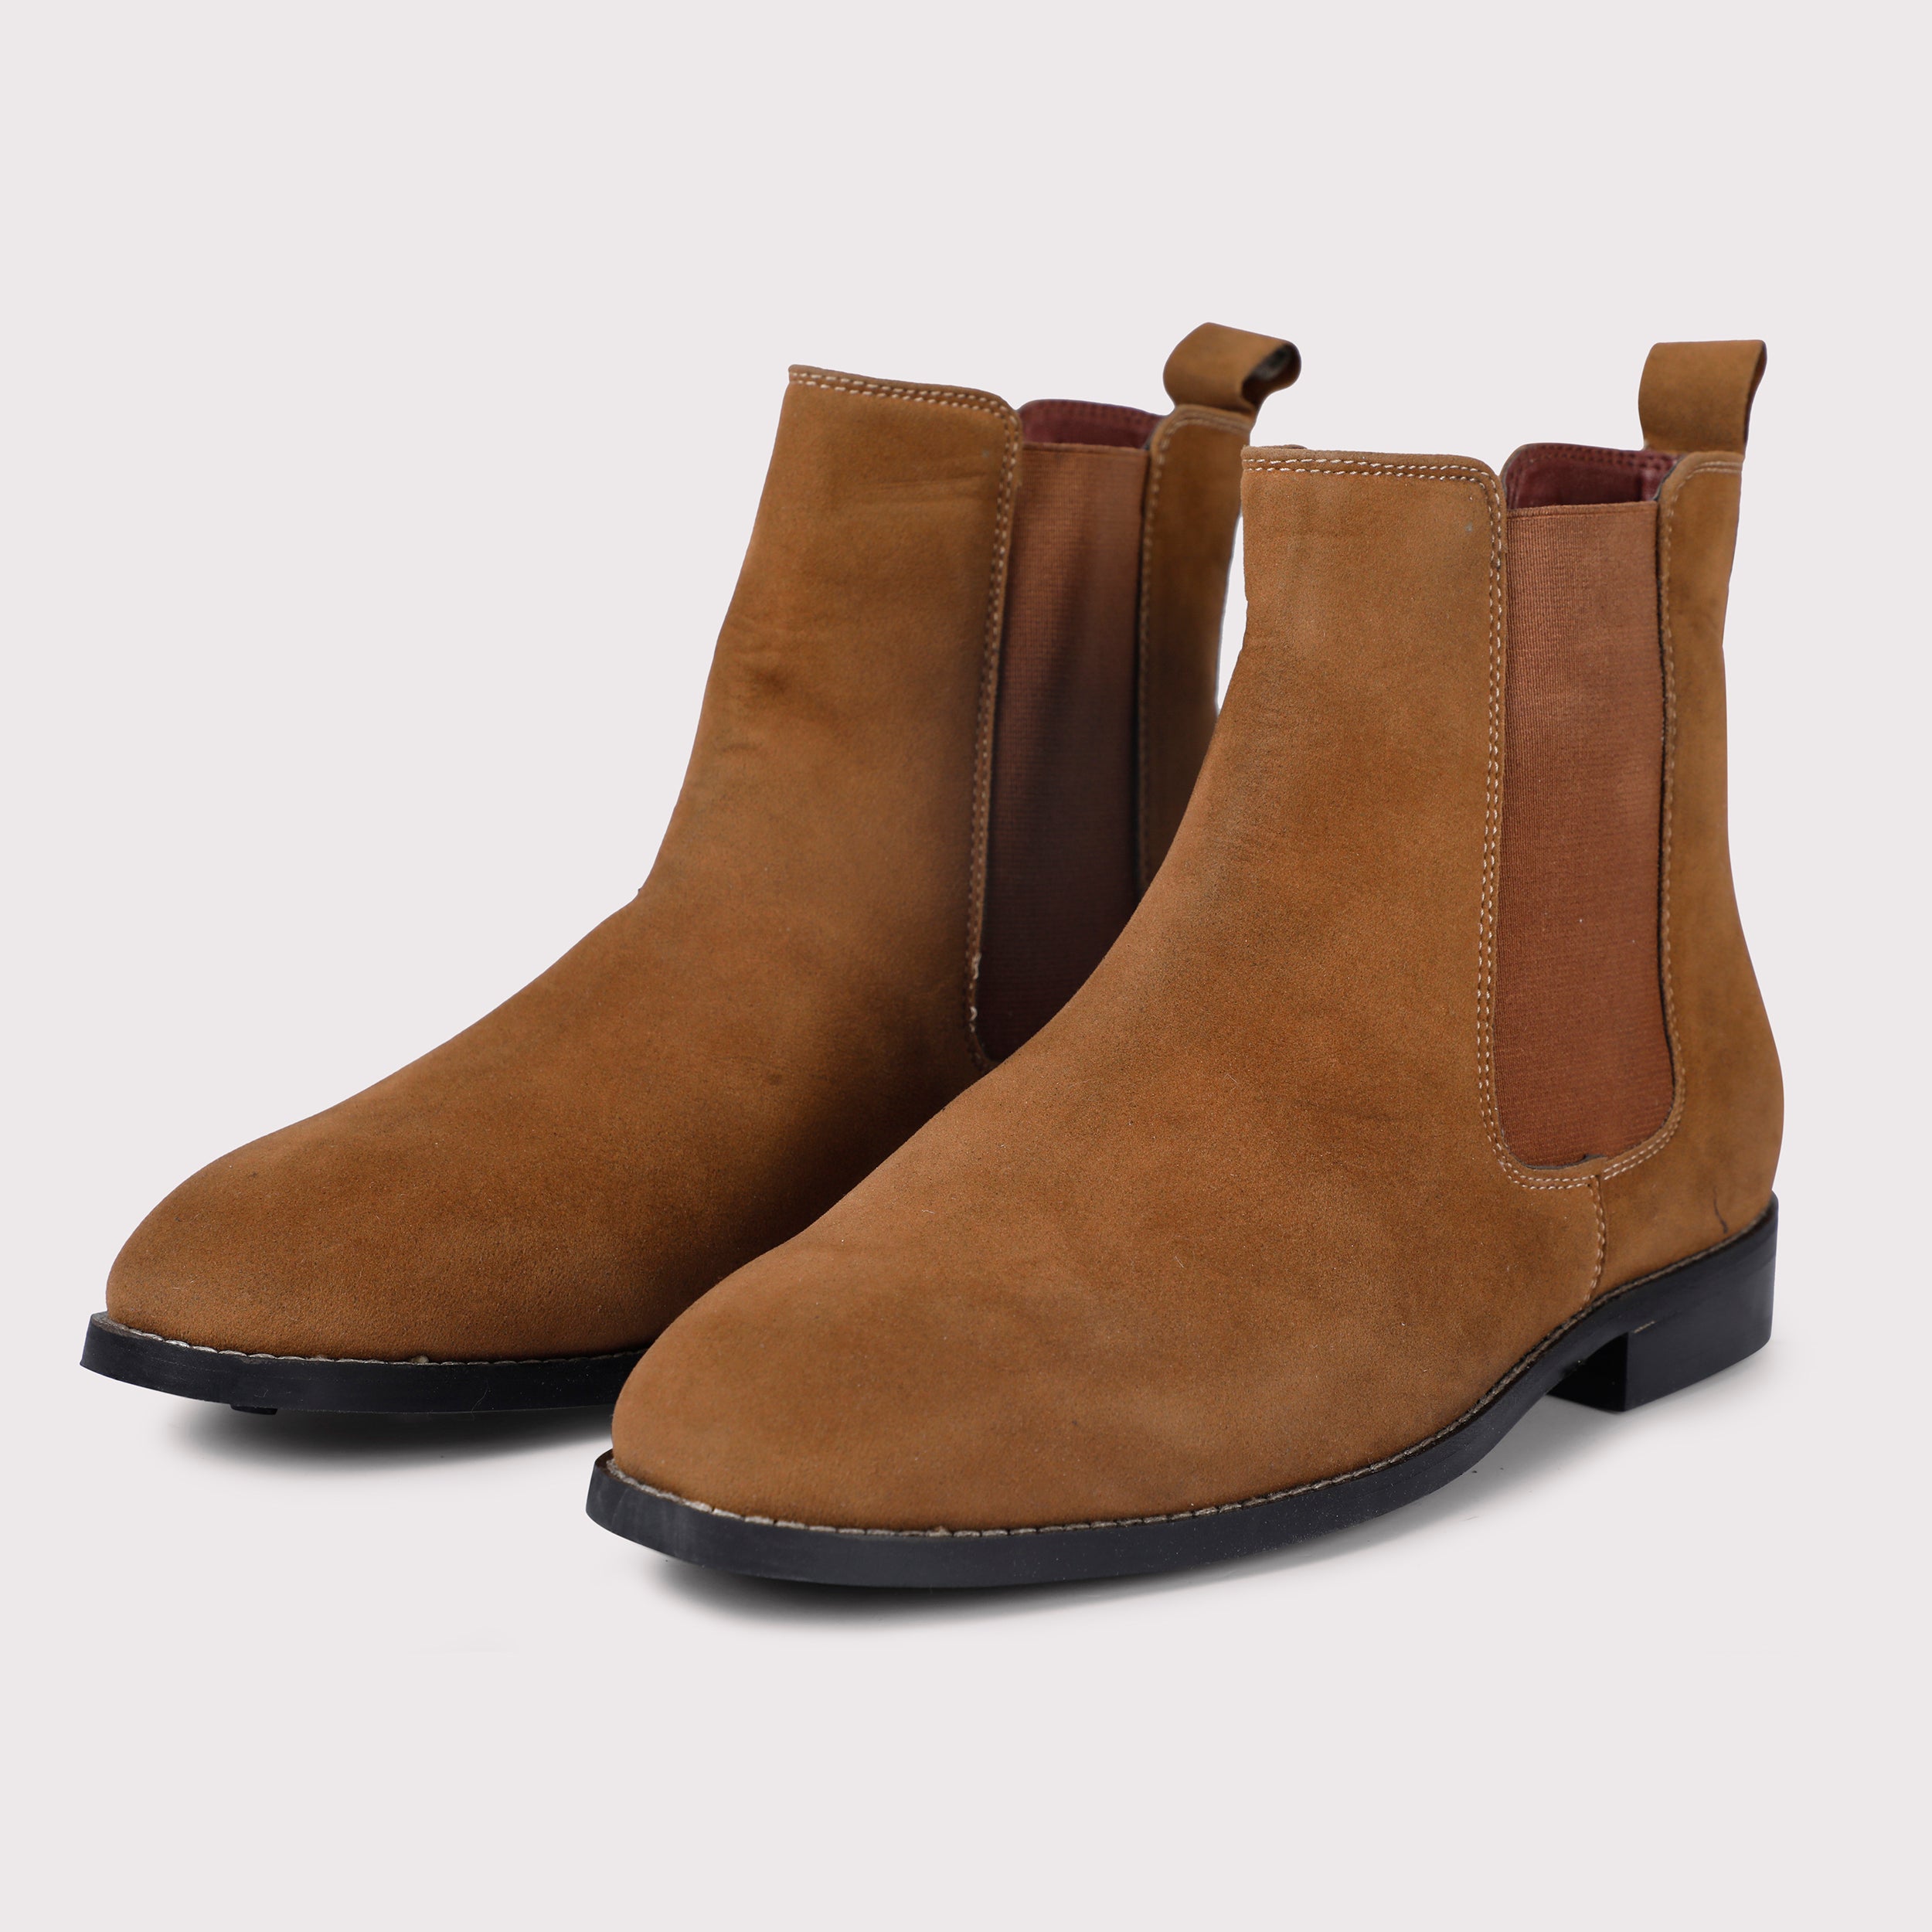 Tan Suede Ravien Harness Chelsea Boots with Golden Chain – Costoso Italiano